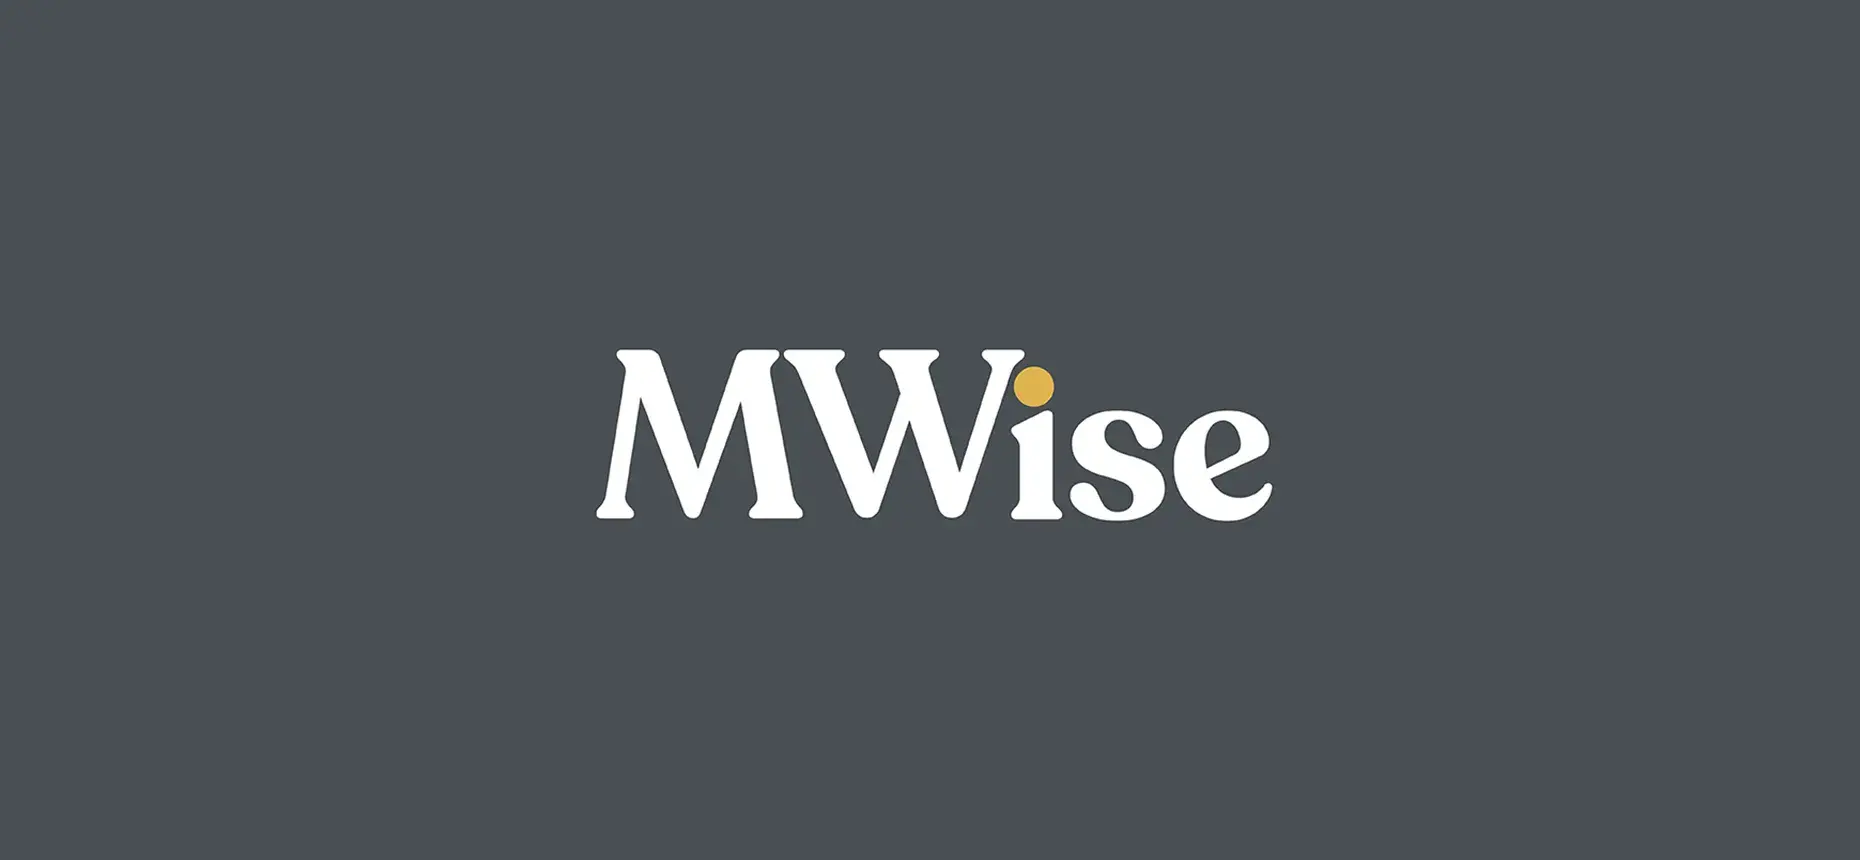 Be MWise about your investment options!